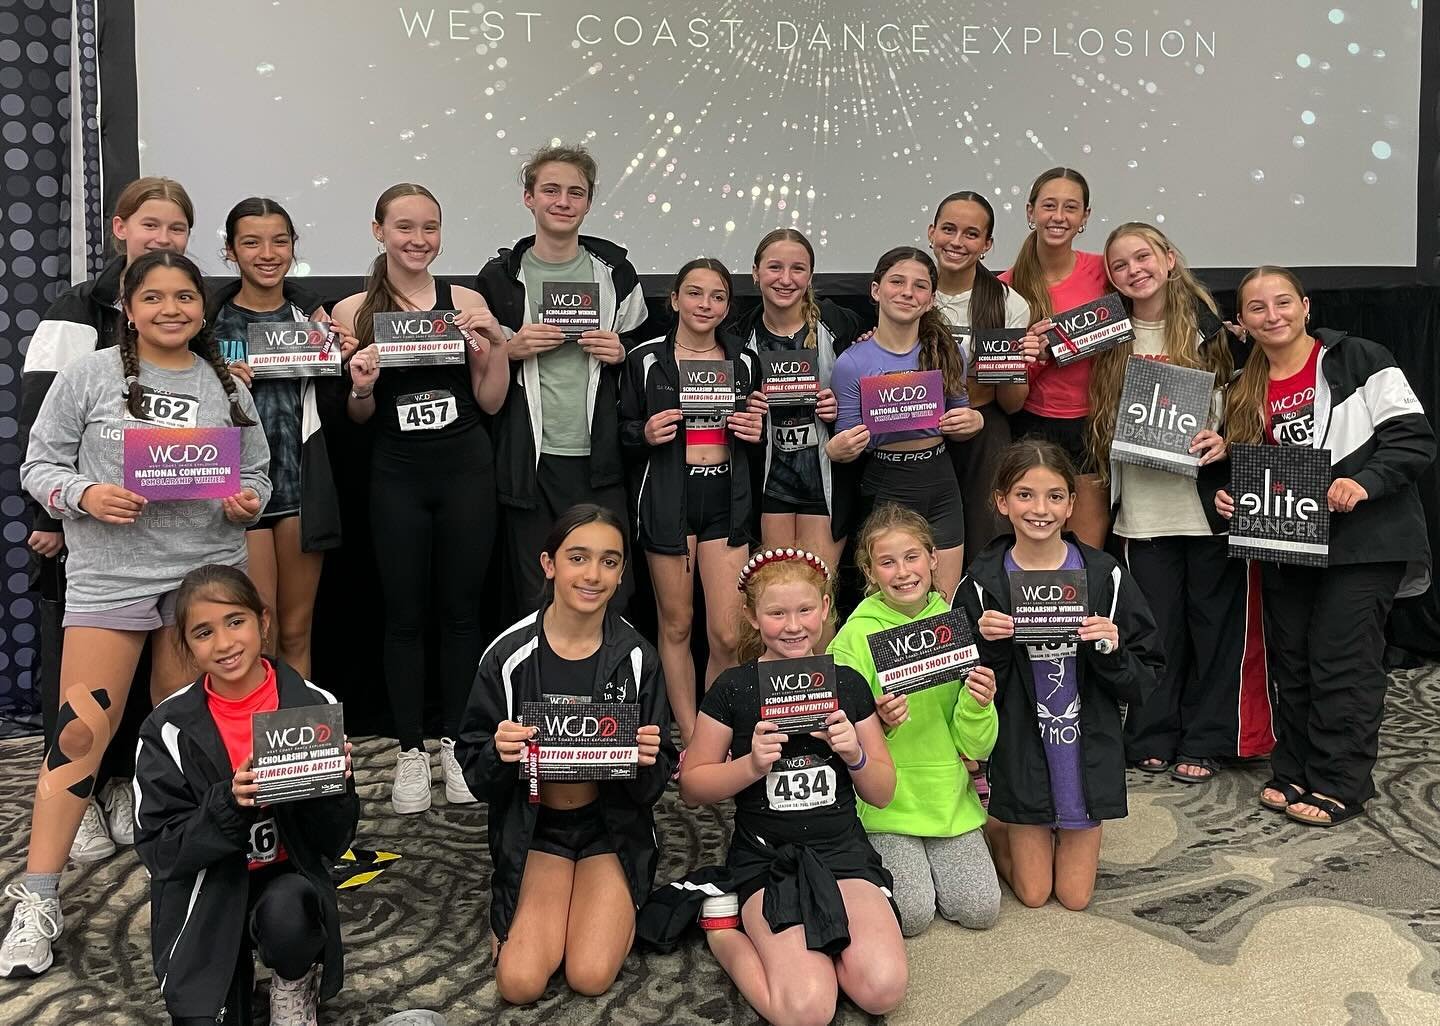 Weekend recap coming soon! For now, huge congratulations to these dancers for their recognition during classes and Scholarship auditions at @westcoastdanceexplosion this weekend! 
_________________________
Silver Elite: Hannah B &amp; Berkley W
Year-